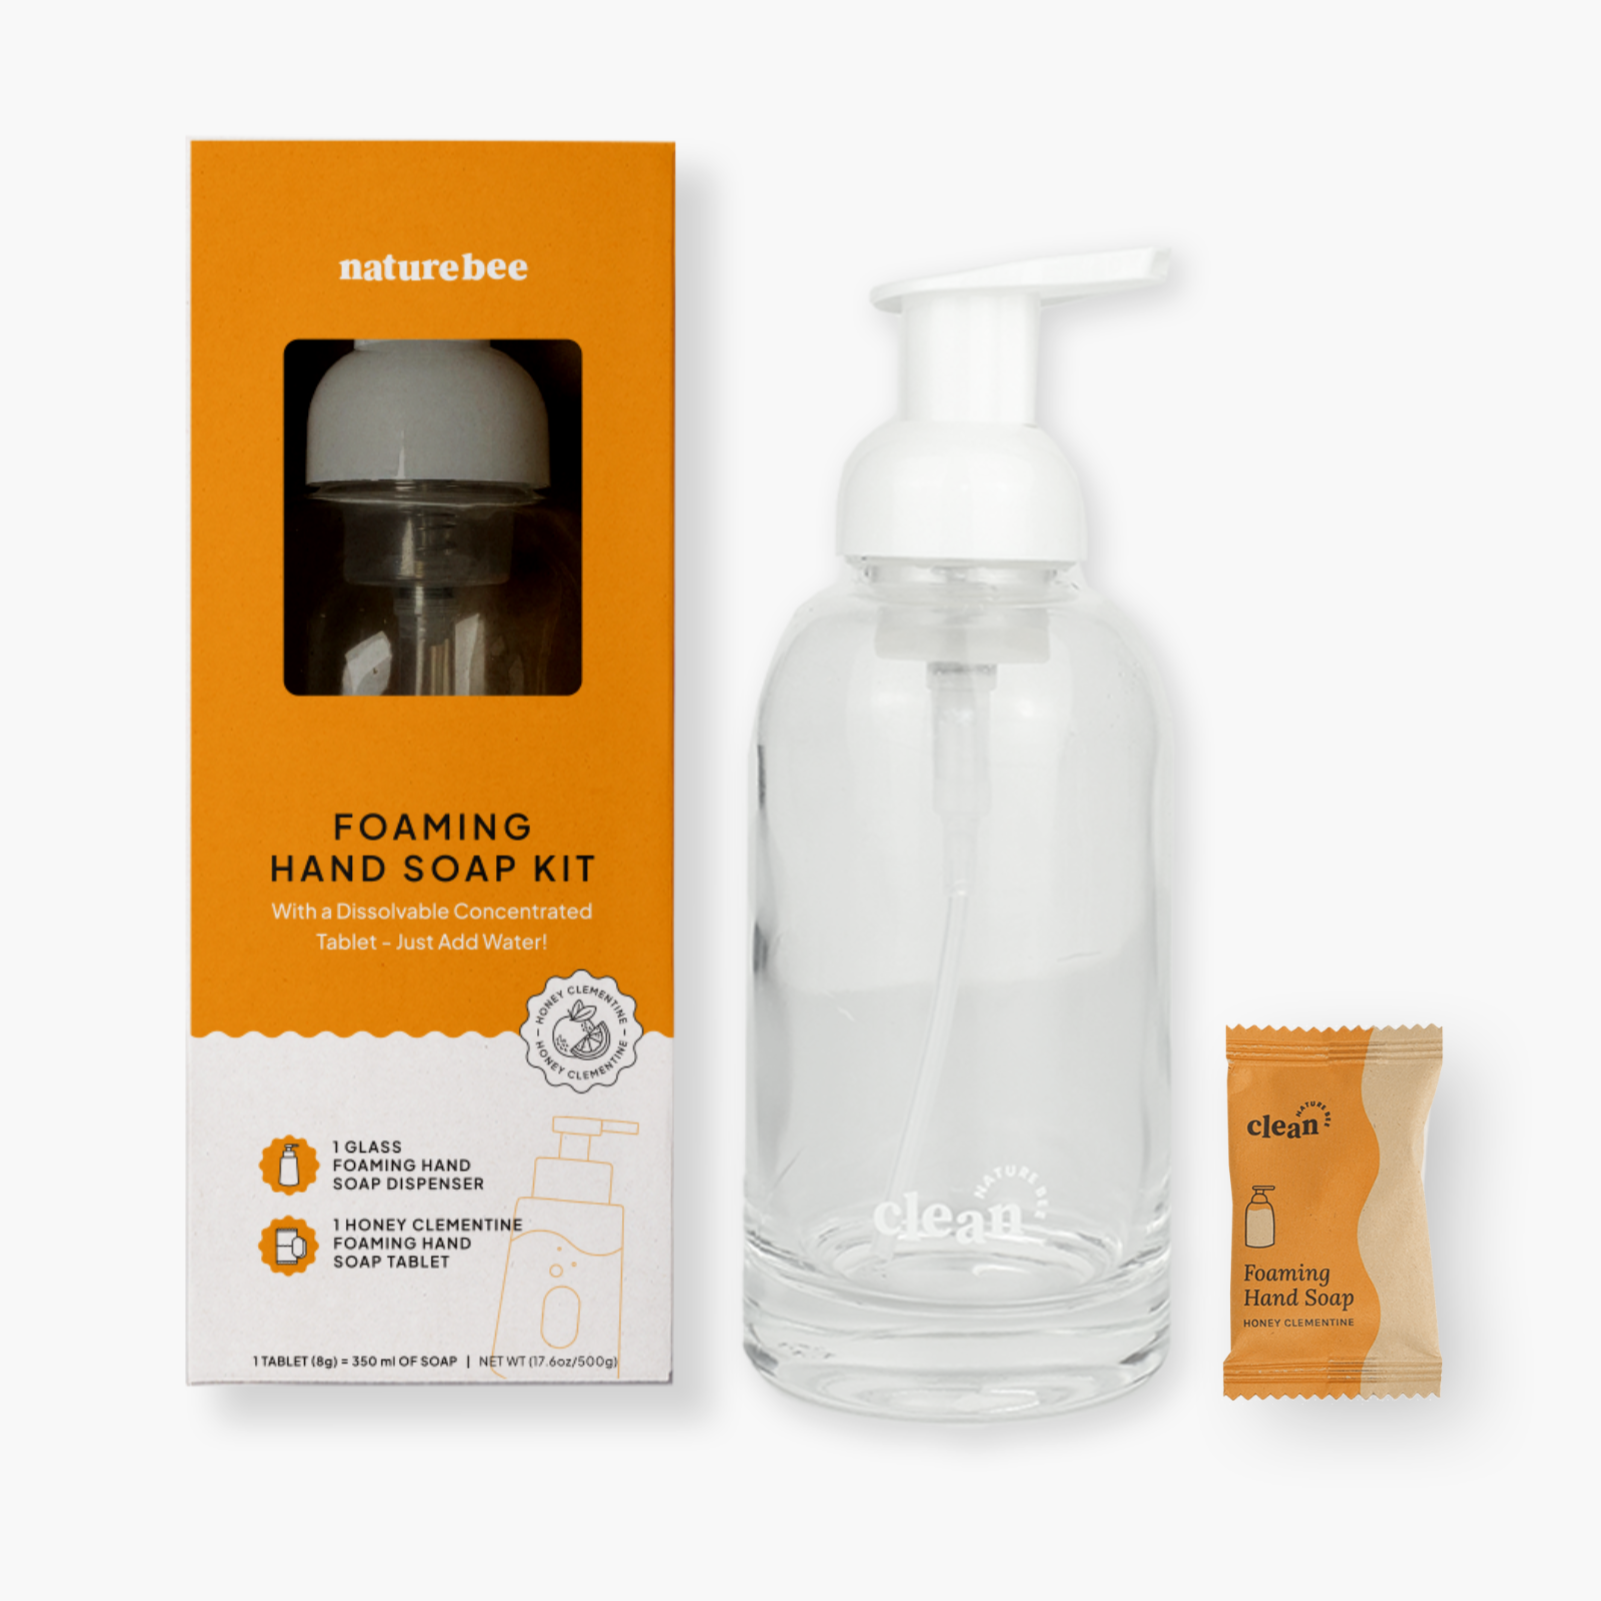 Nature Bee Clean - Foaming Hand Soap Kits